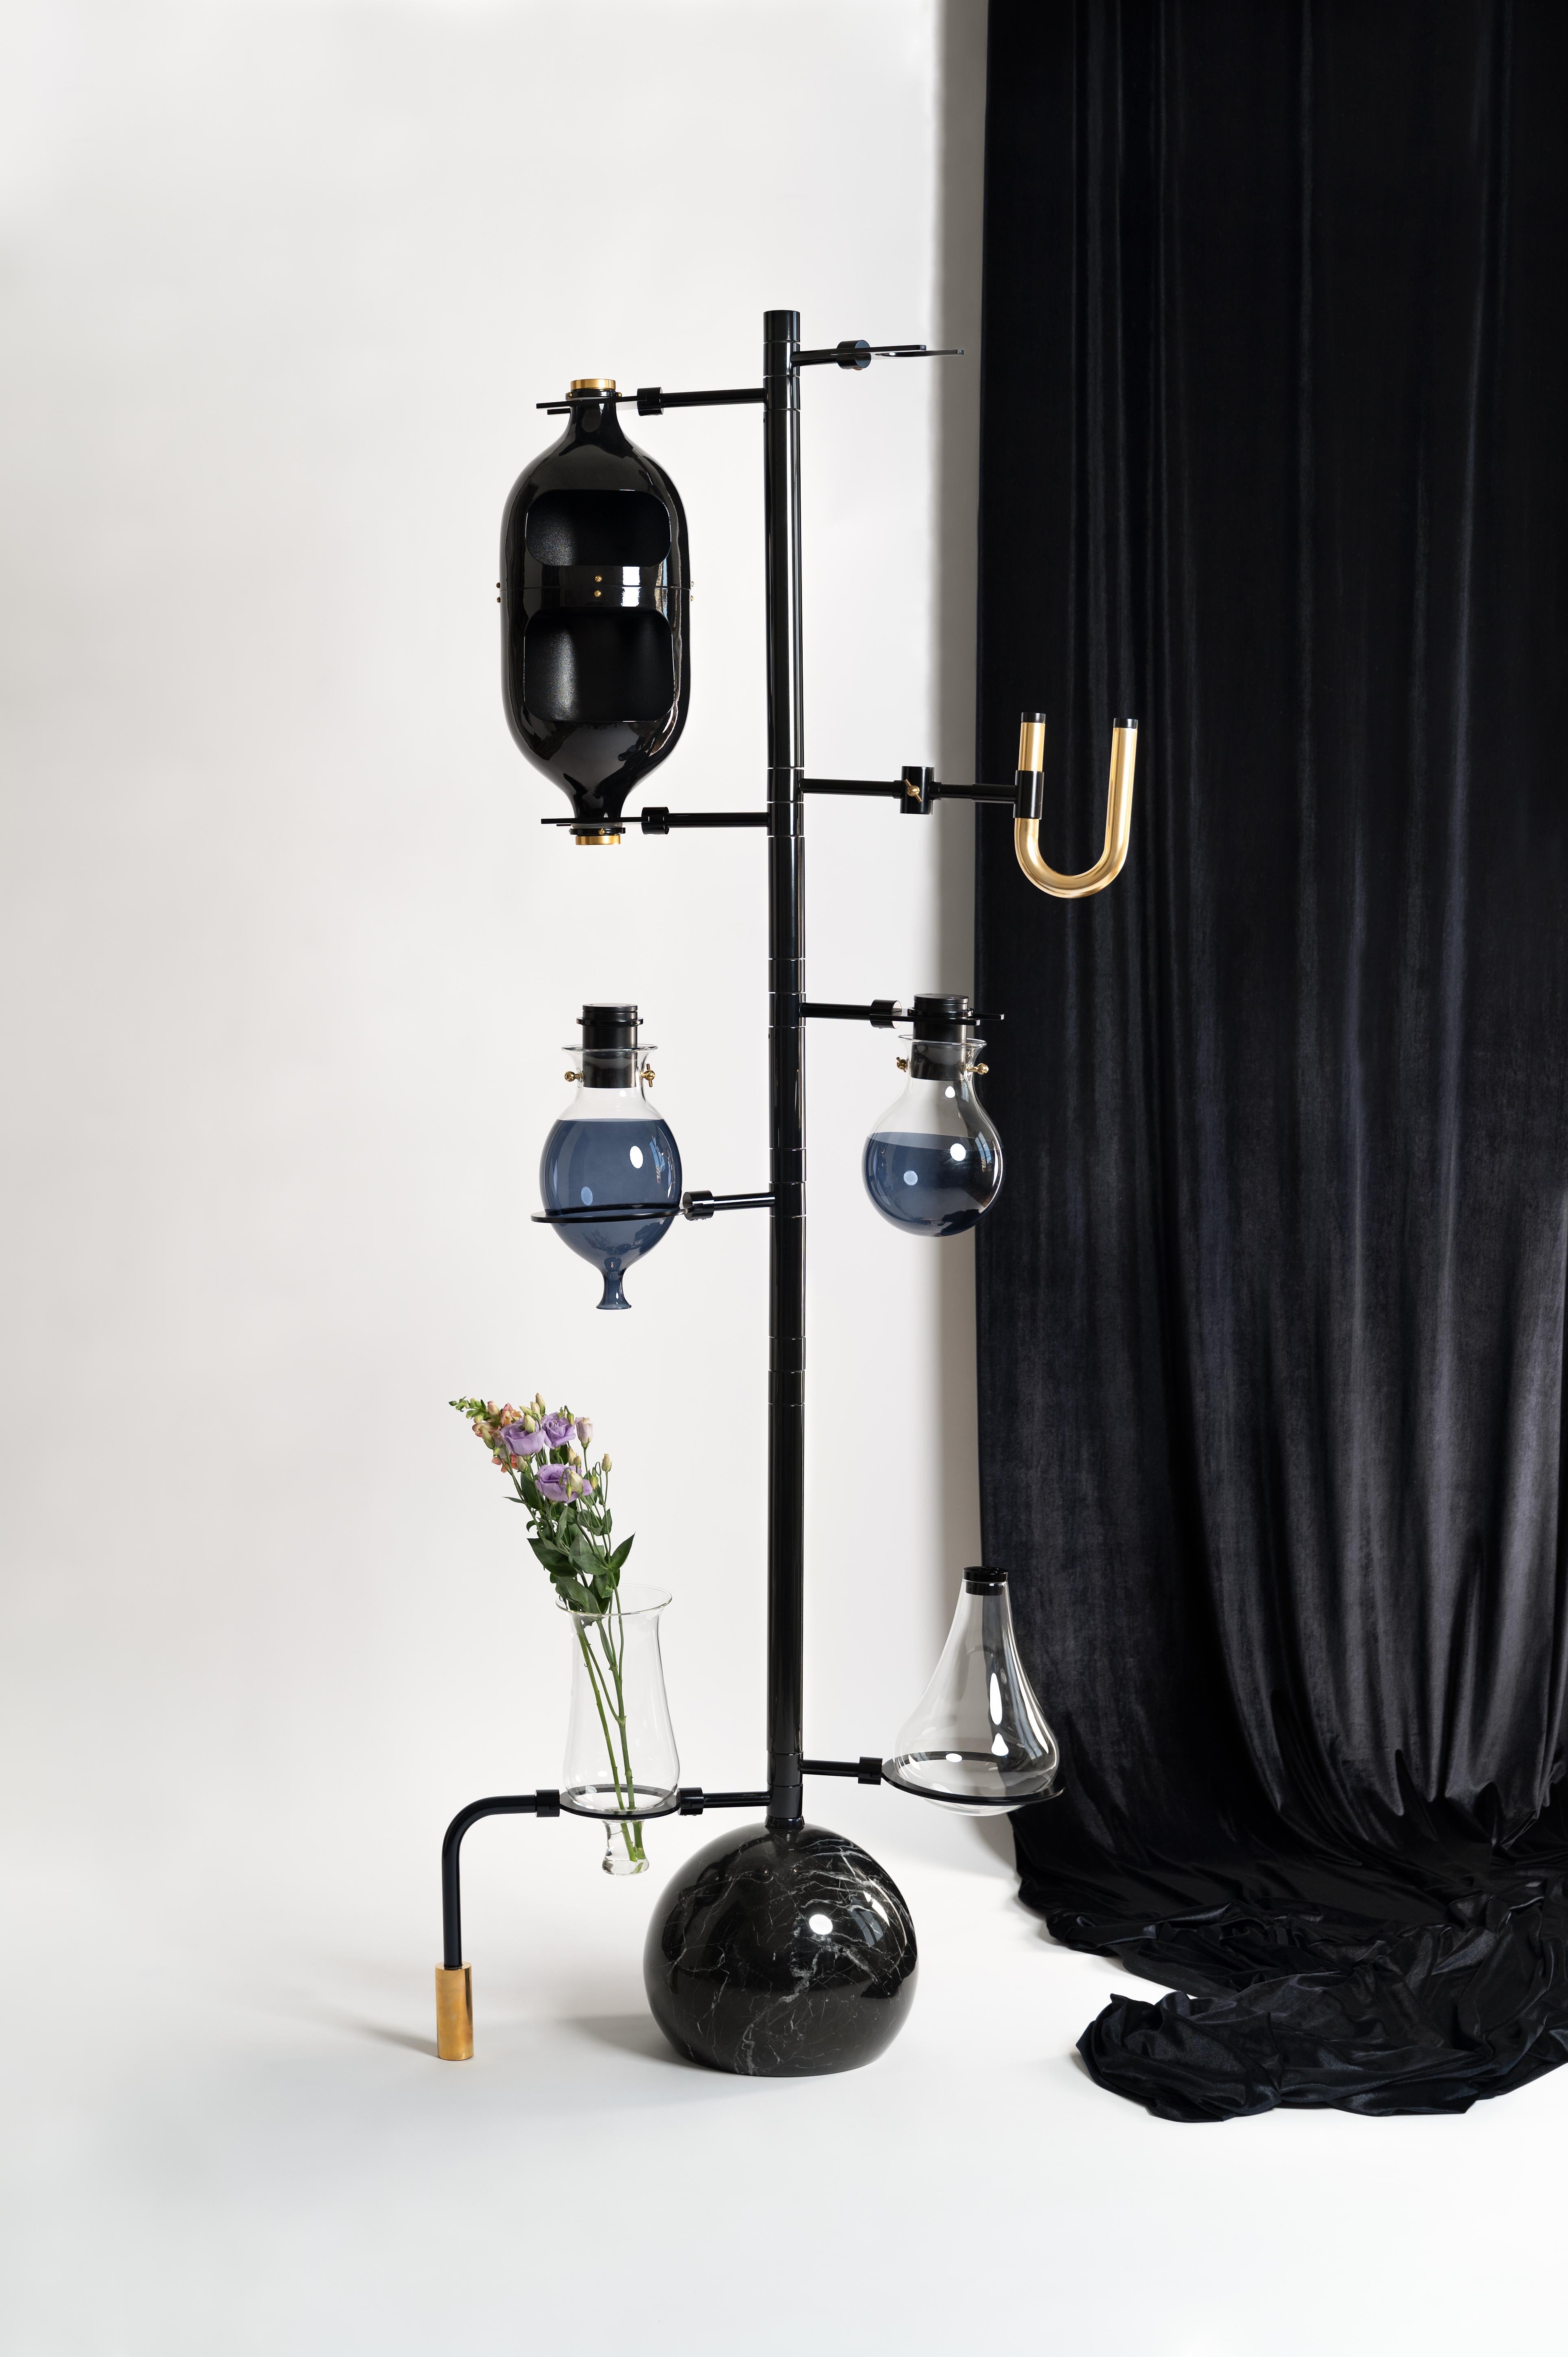 Black Emotional Lab Floor Lamp by Hania Jneid
Dimensions: W 100 x D 100 x H 190 cm
Materials: Anodised Aluminum, screws and fixing components in Brass.

The Emotional Lab is a multifunctional sculptural art piece, that encompass-es lighting, a